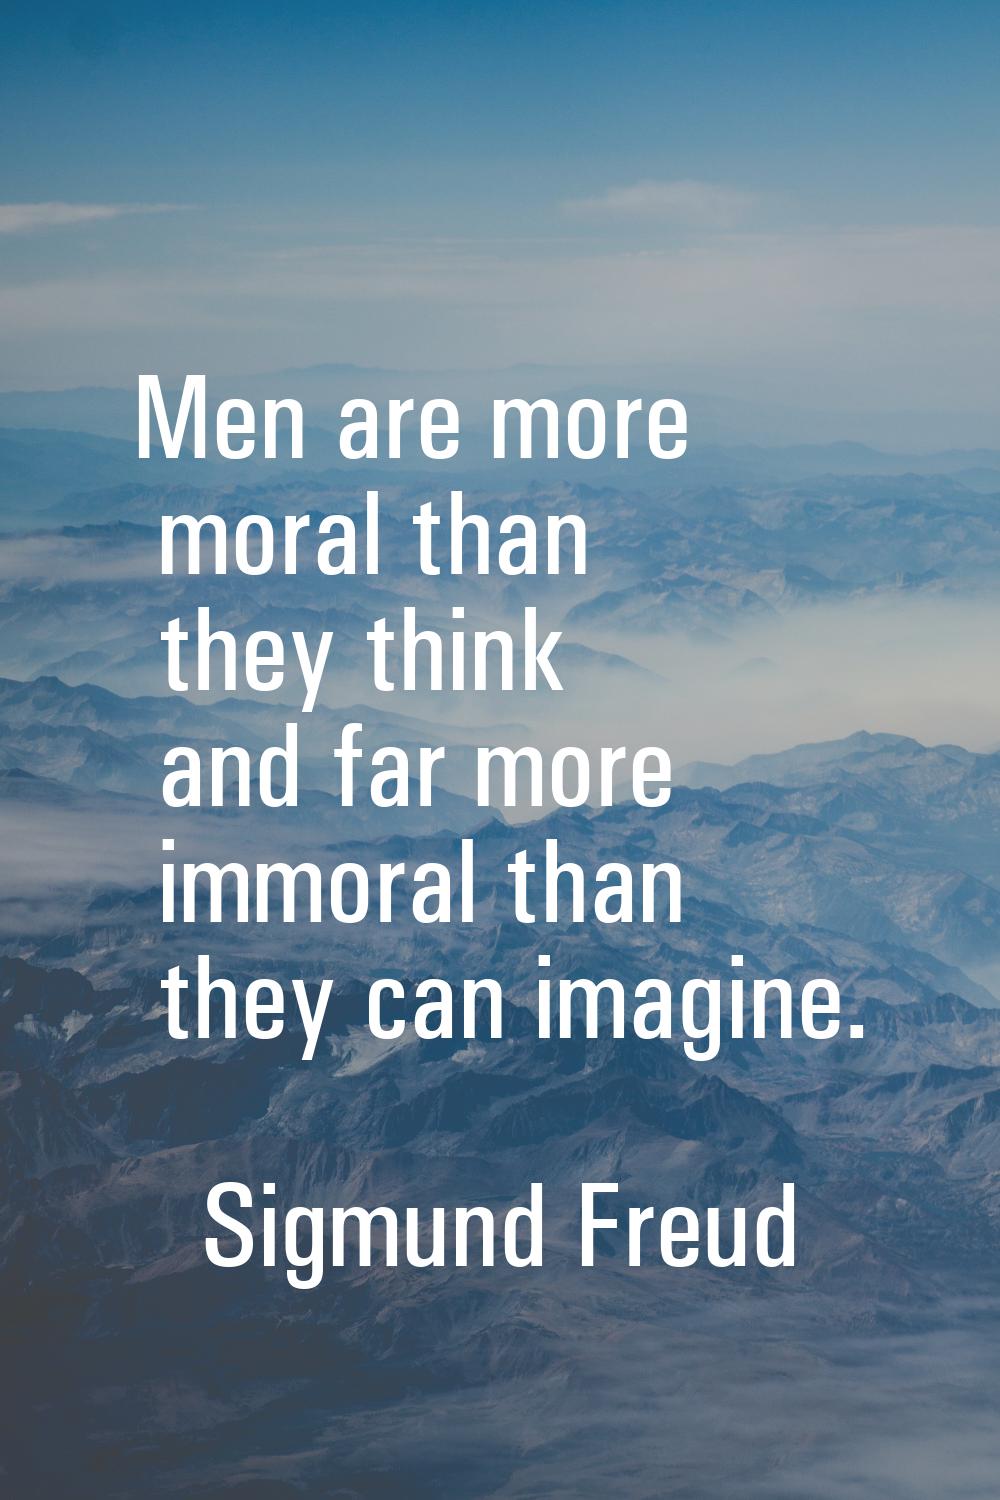 Men are more moral than they think and far more immoral than they can imagine.